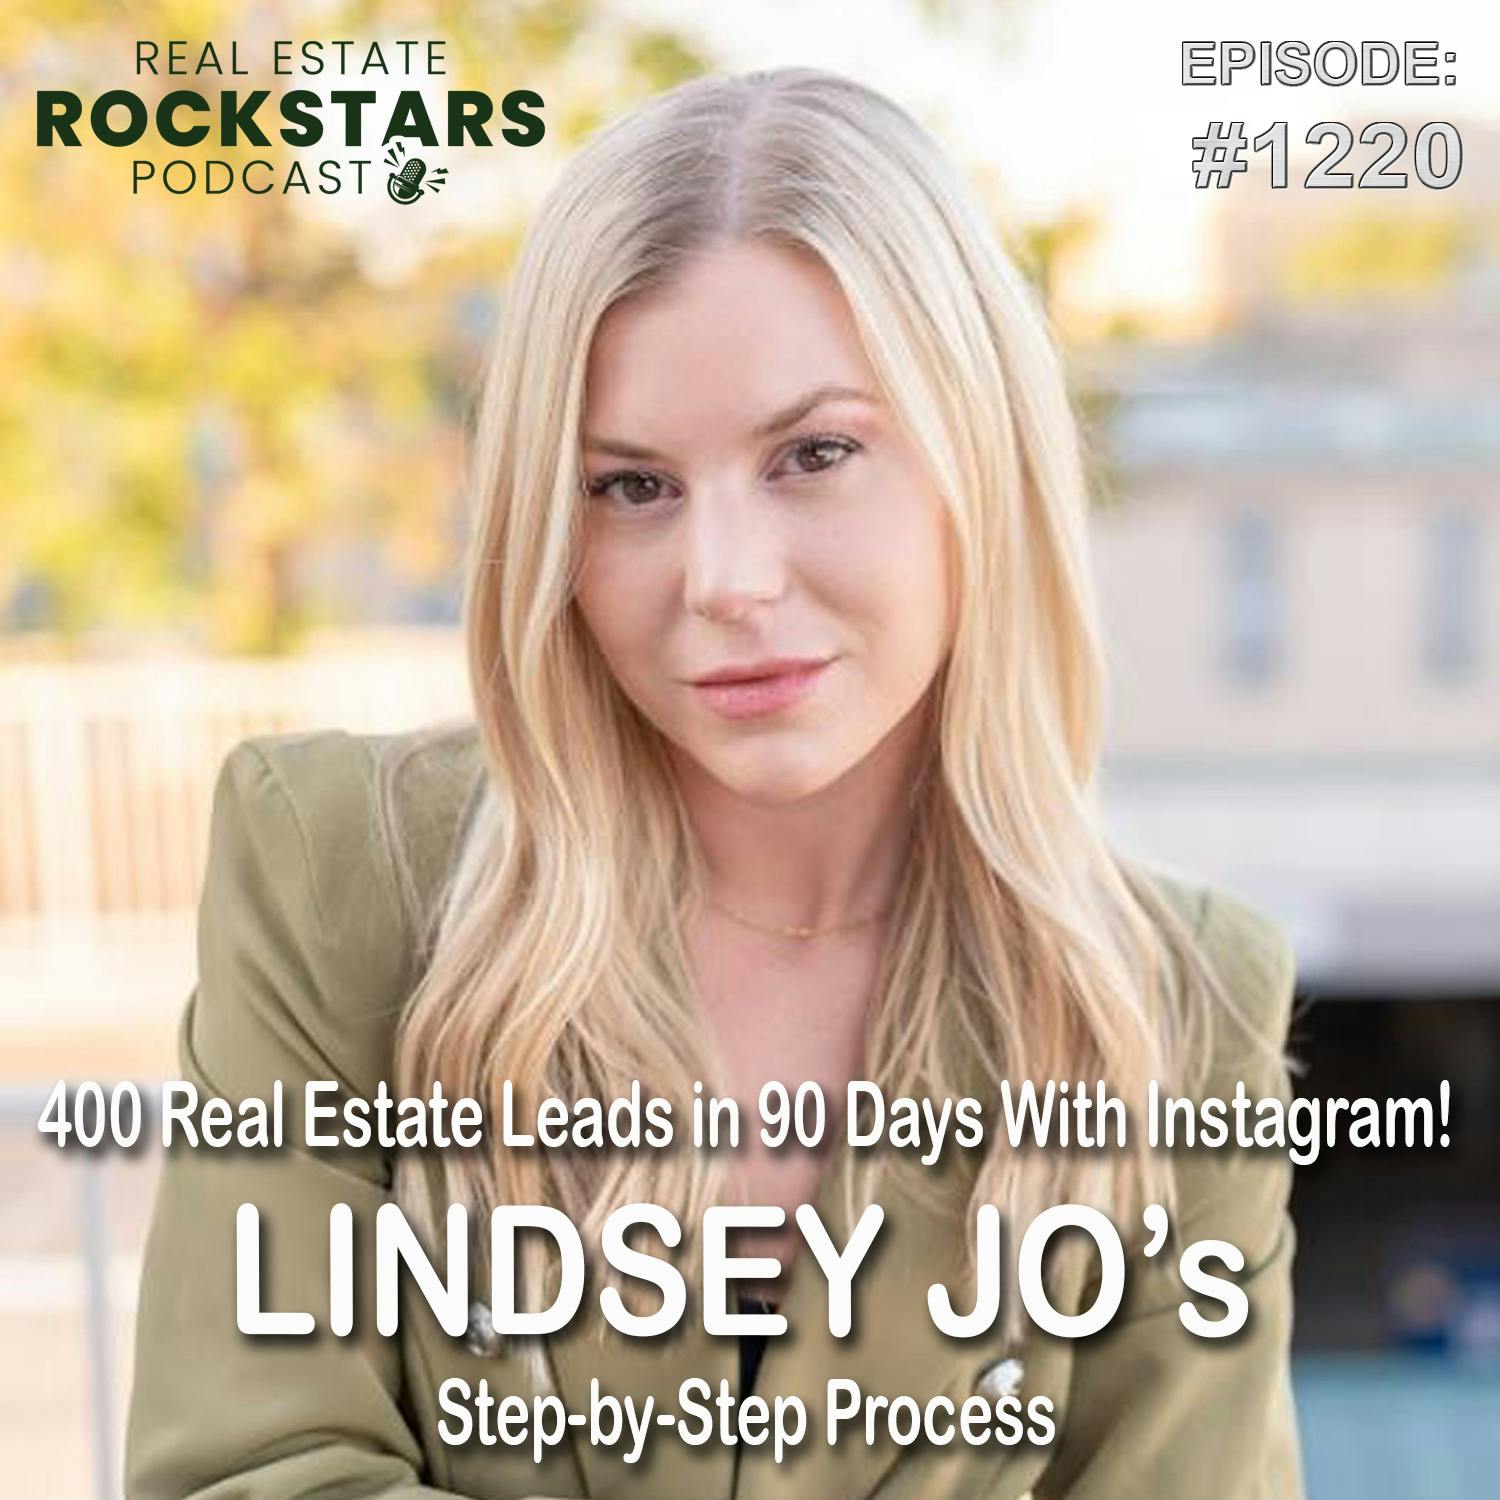 1220: 400 Real Estate Leads in 90 Days With Instagram! Lindsey Jo’s Step-by-Step Process